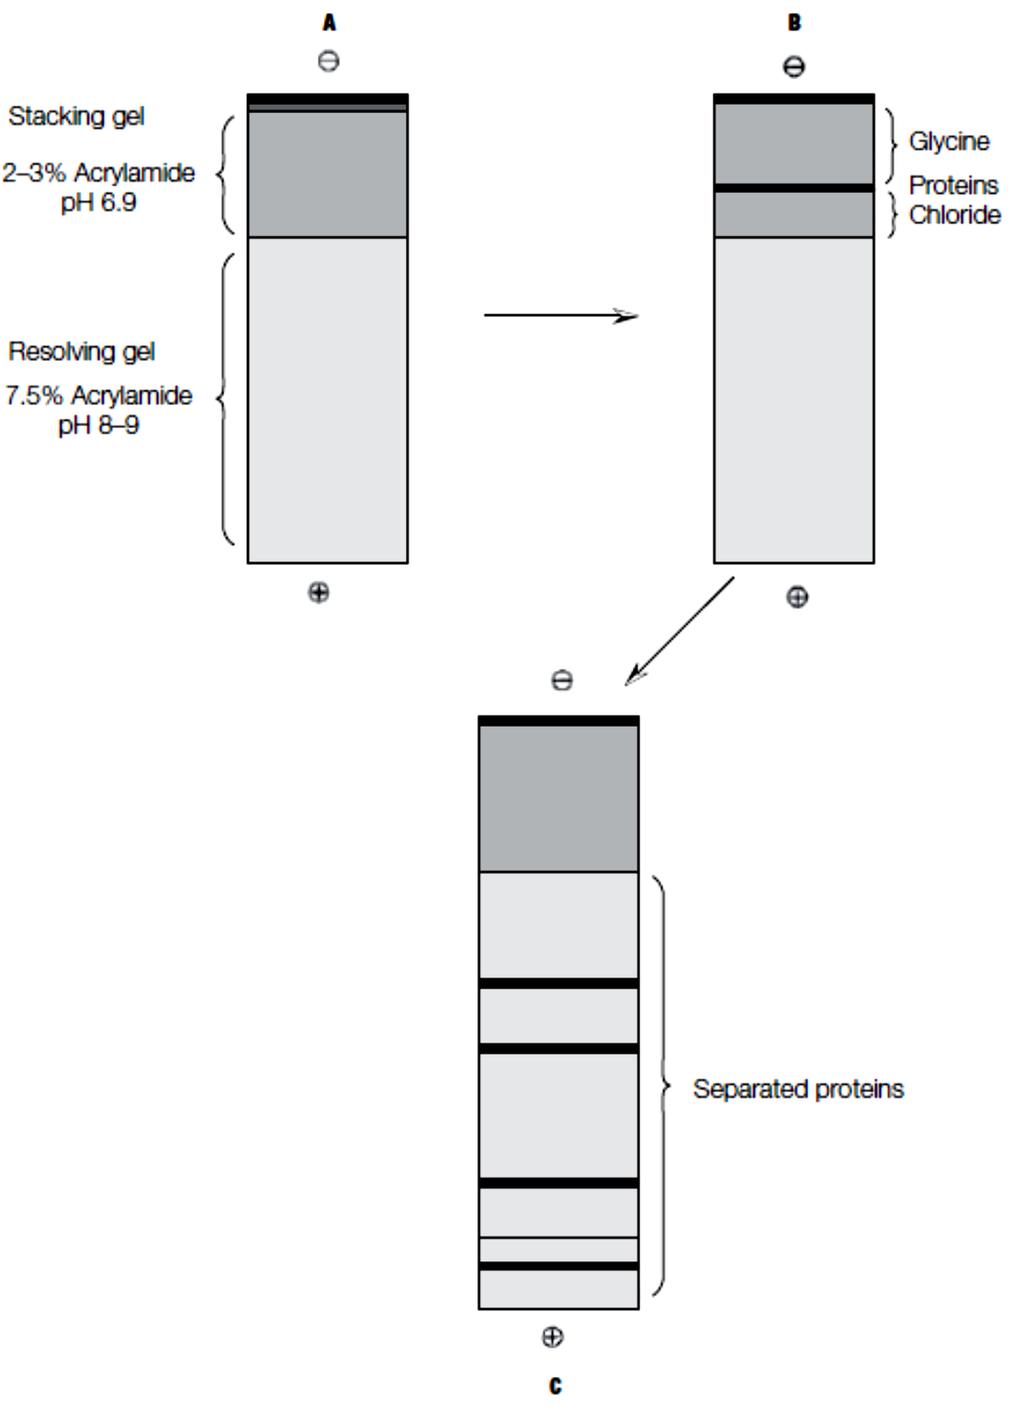 FIGURE 5 The process of disc gel electrophoresis. A Before electrophoresis. B Movement of chloride, glycinate, and protein through the stacking gel.